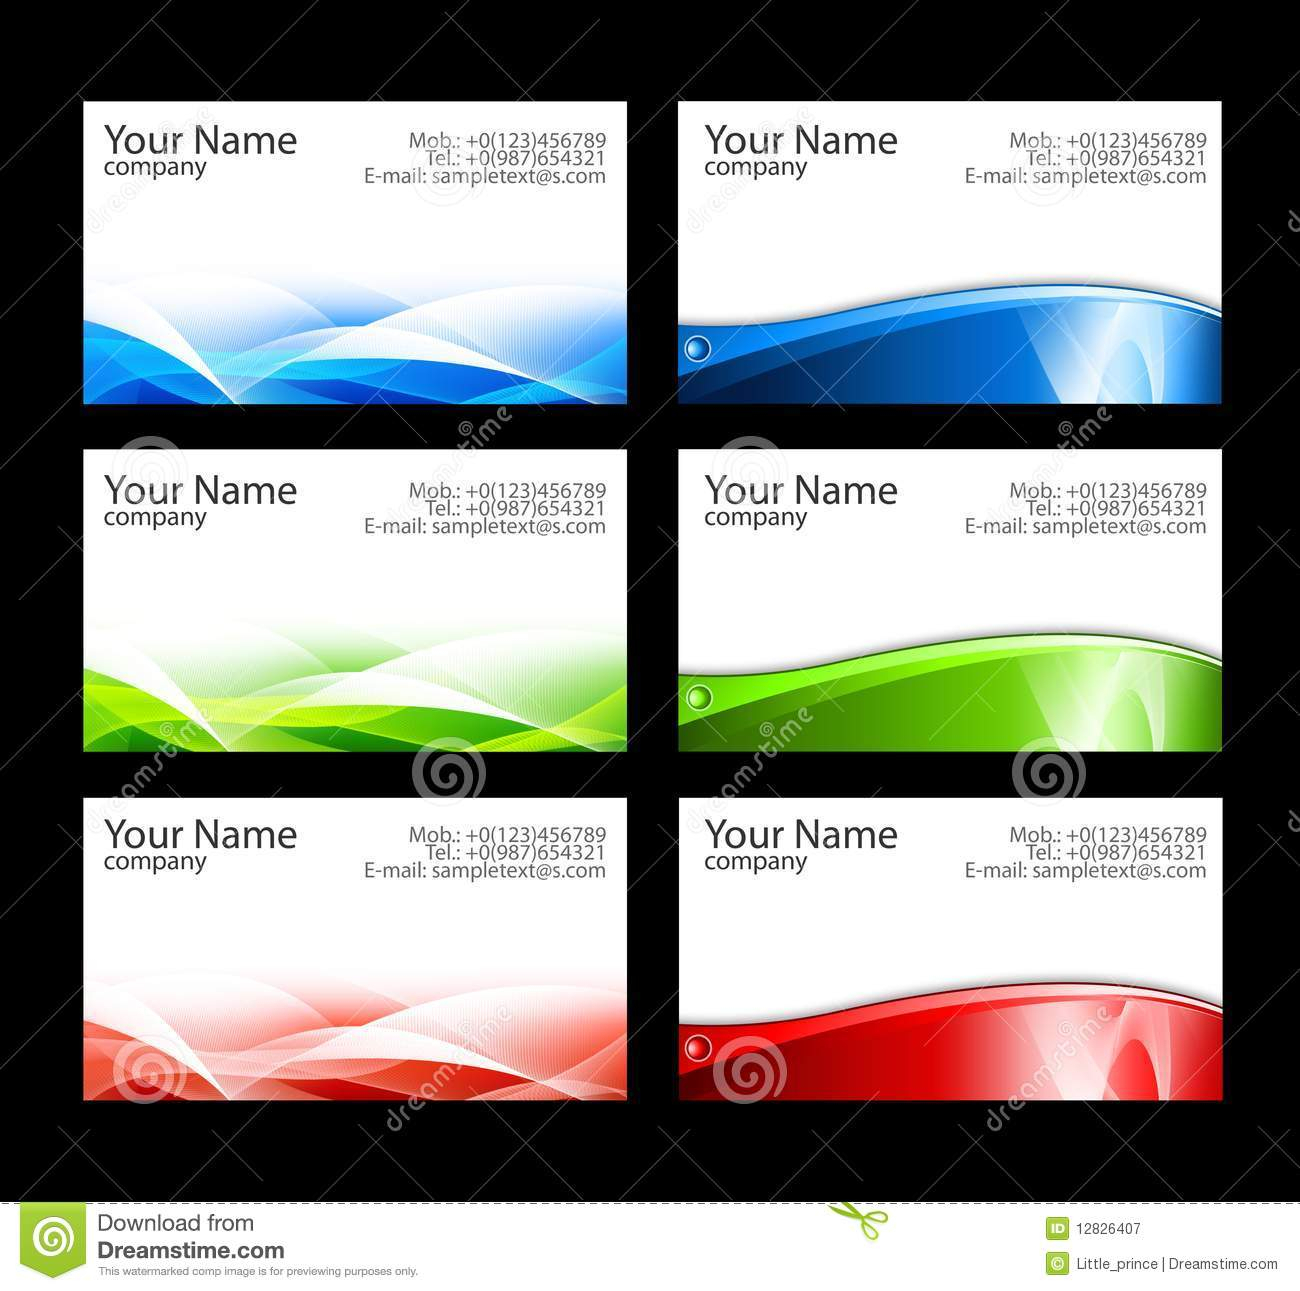 17 Business Cards Templates Free Downloads Images – Free Throughout Templates For Visiting Cards Free Downloads